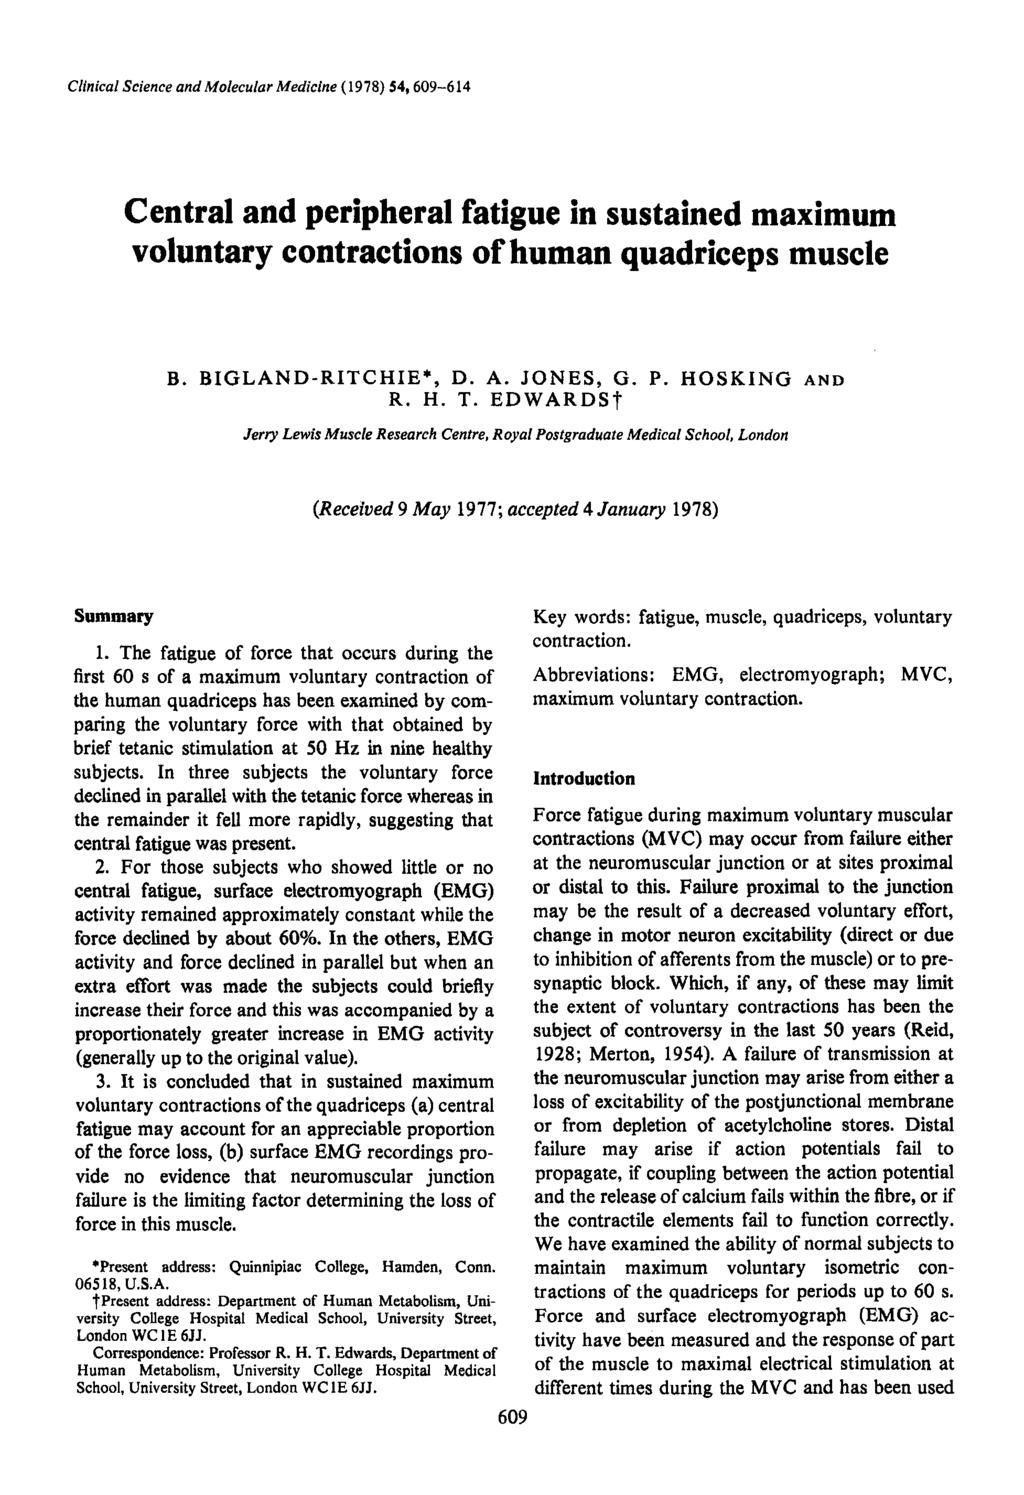 Clinical Science and Molecular Medicine (1978) 54,609-614 Central and peripheral fatigue in sustained maximum voluntary contractions of human quadriceps muscle B. BIGLAND-RITCHIE*, D. A. JONES, G. P.